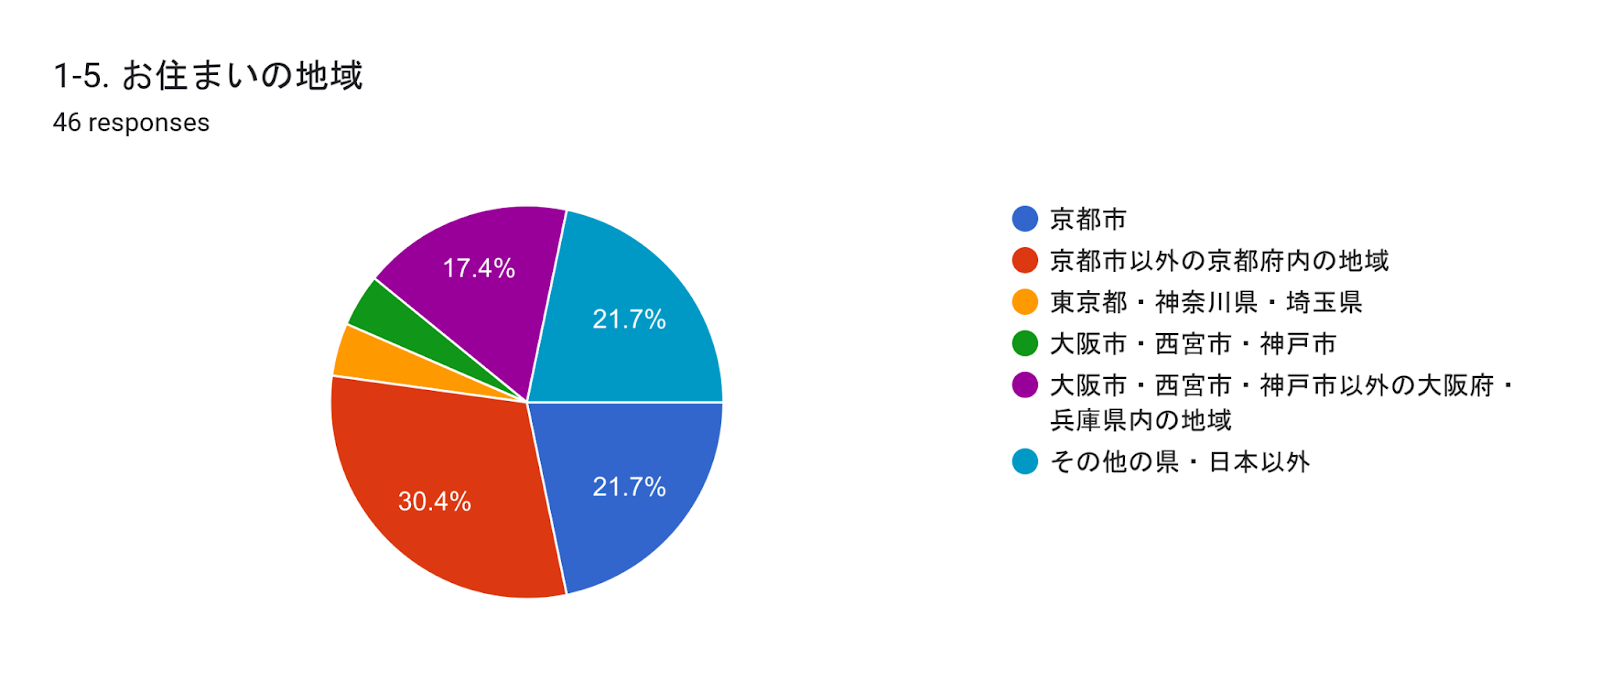 Forms response chart. Question title: 1-5. お住まいの地域. Number of responses: 42 responses.